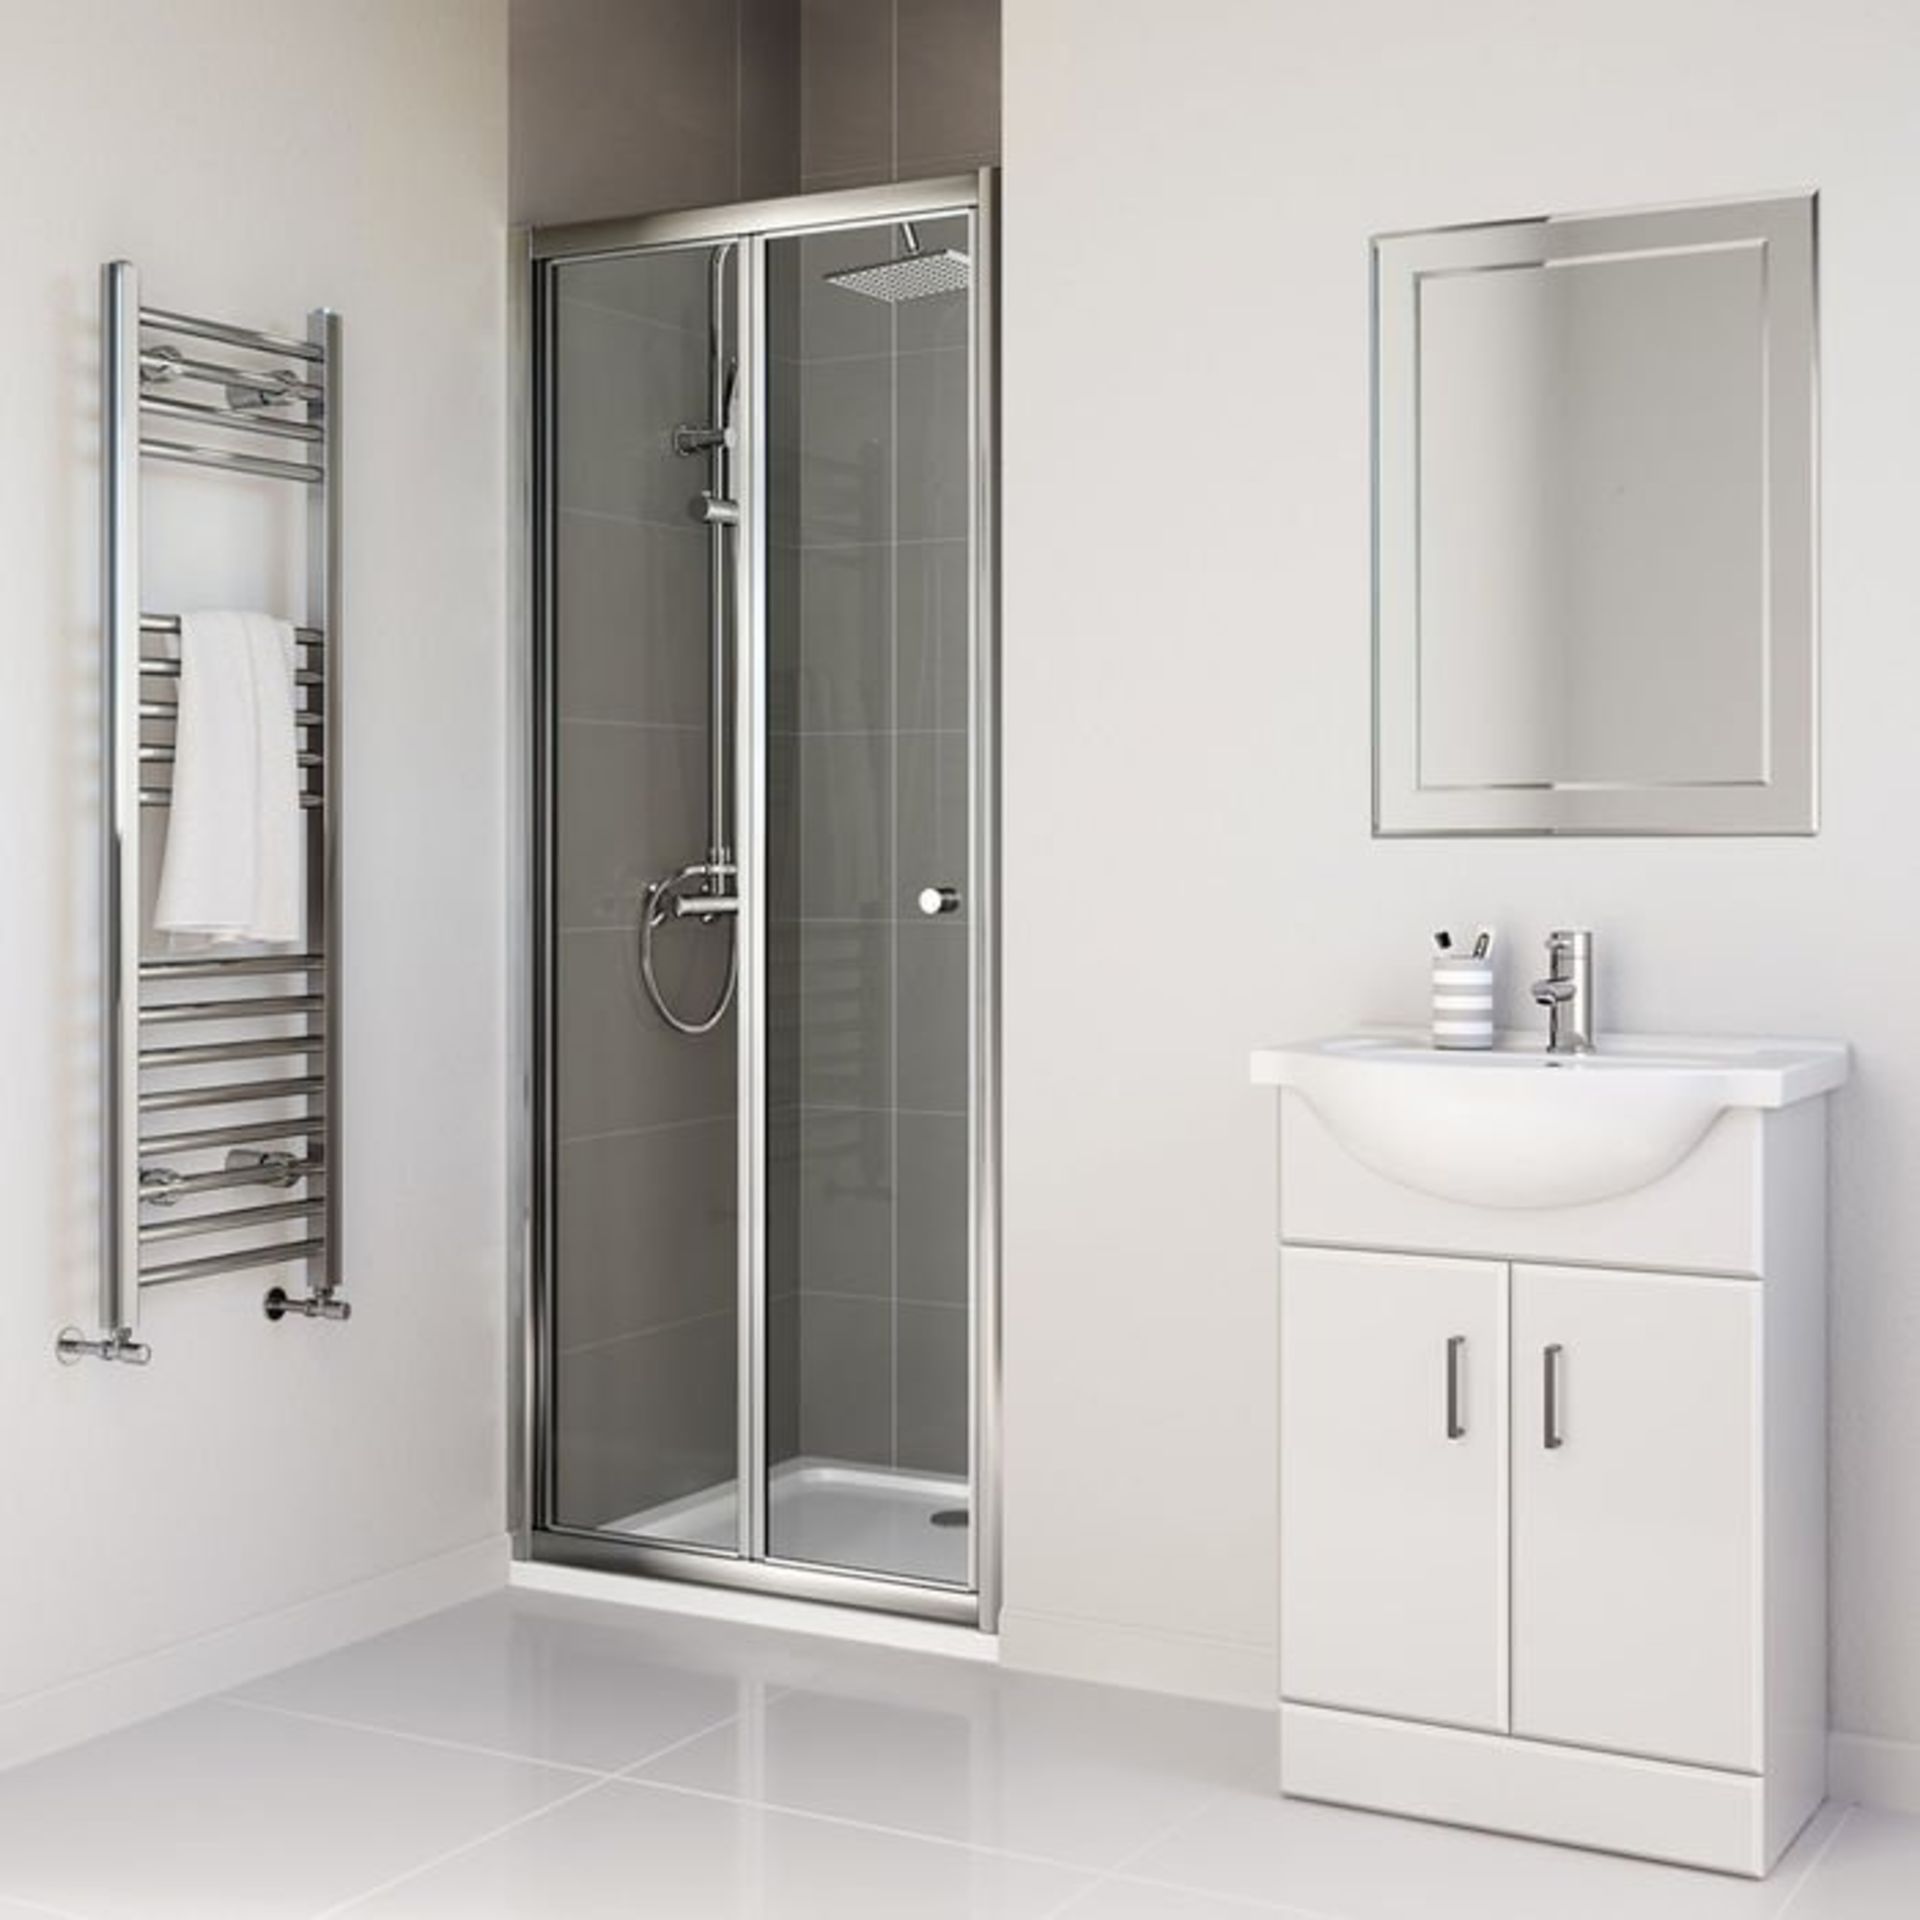 (G192) 900mm - Elements Bi Fold Shower Door. RRP £299.99. 4mm Safety Glass Fully waterproof tested - Image 3 of 3